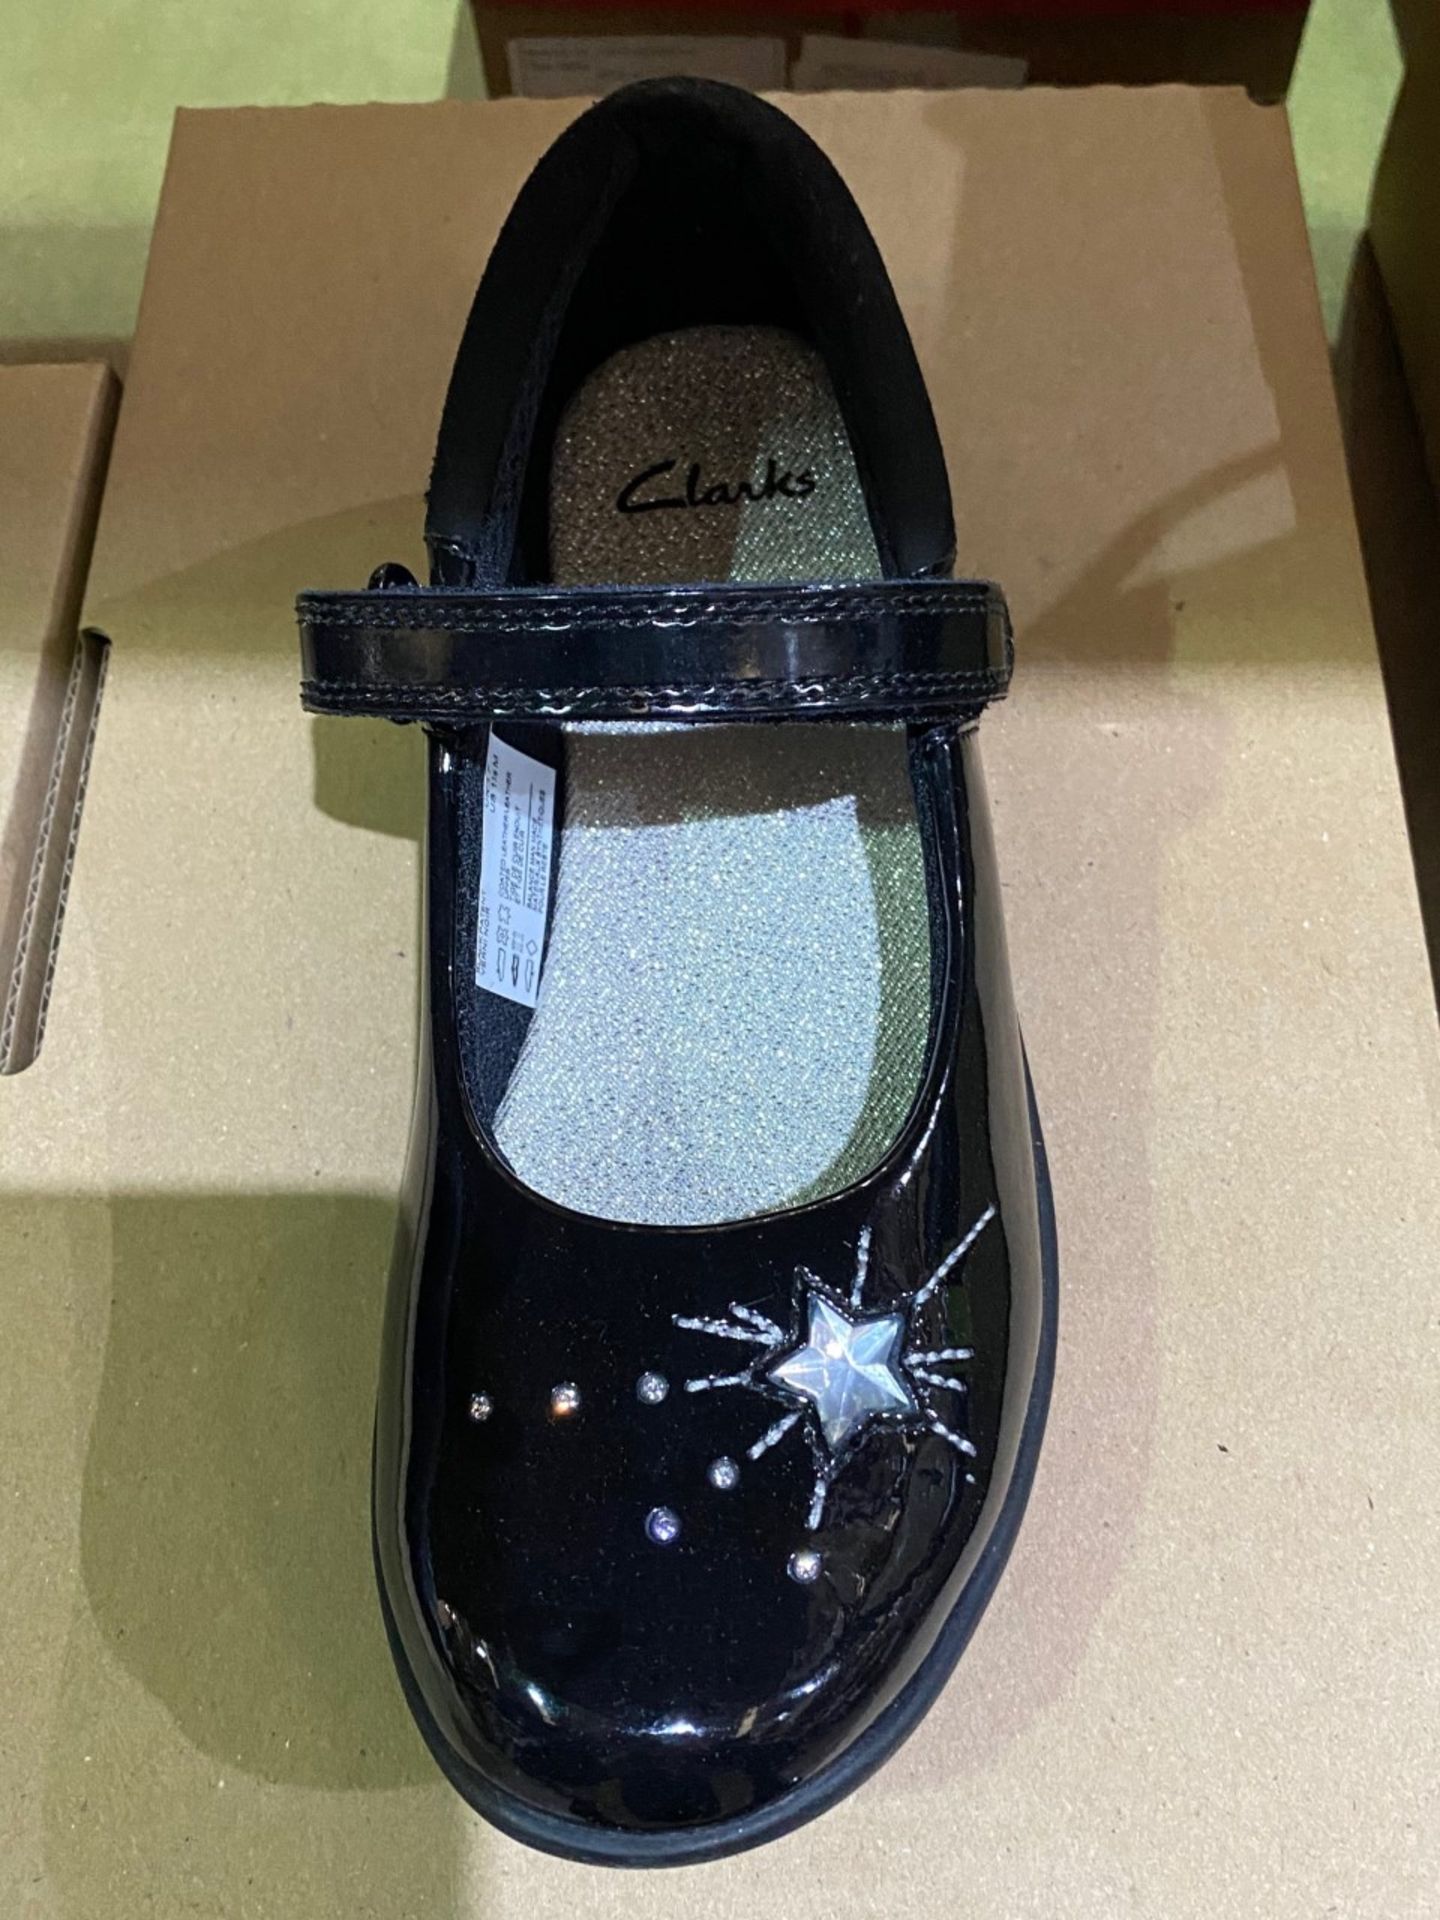 NEW & BOXED CLARKS BLACK PATENT SHOE SIZE JUNIOR 1 - Image 2 of 2